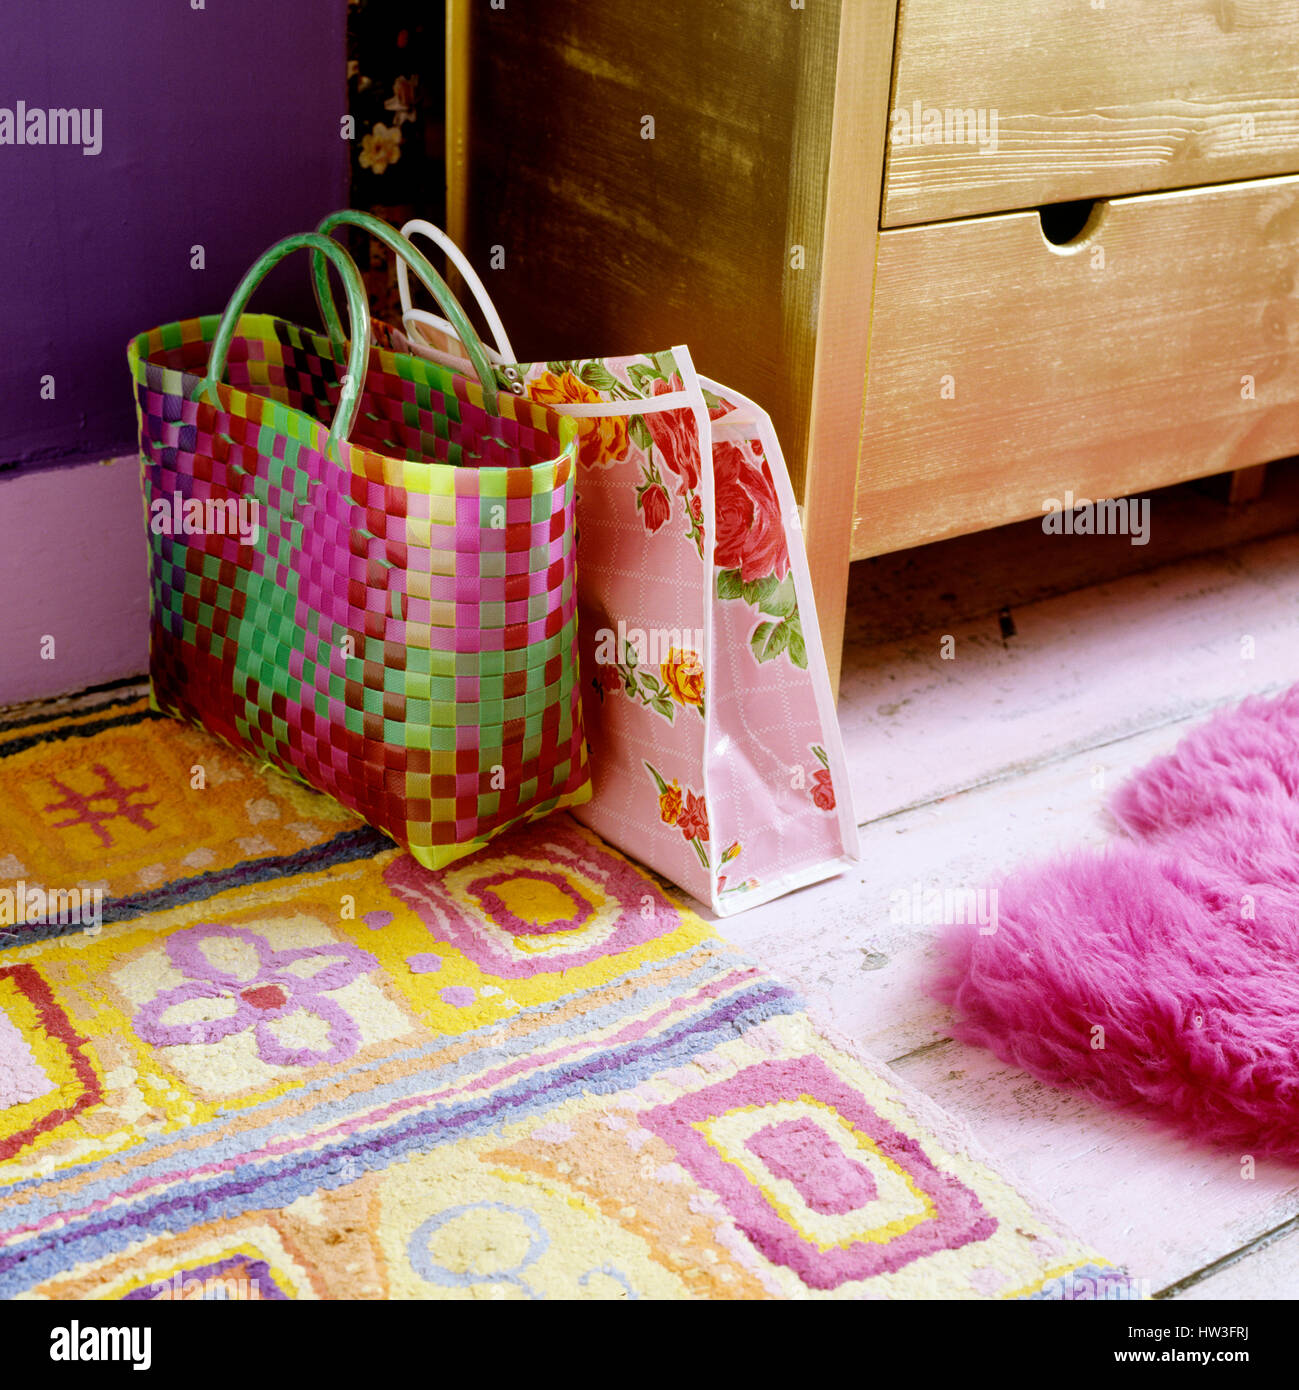 Colorful bags by floral rug. Stock Photo